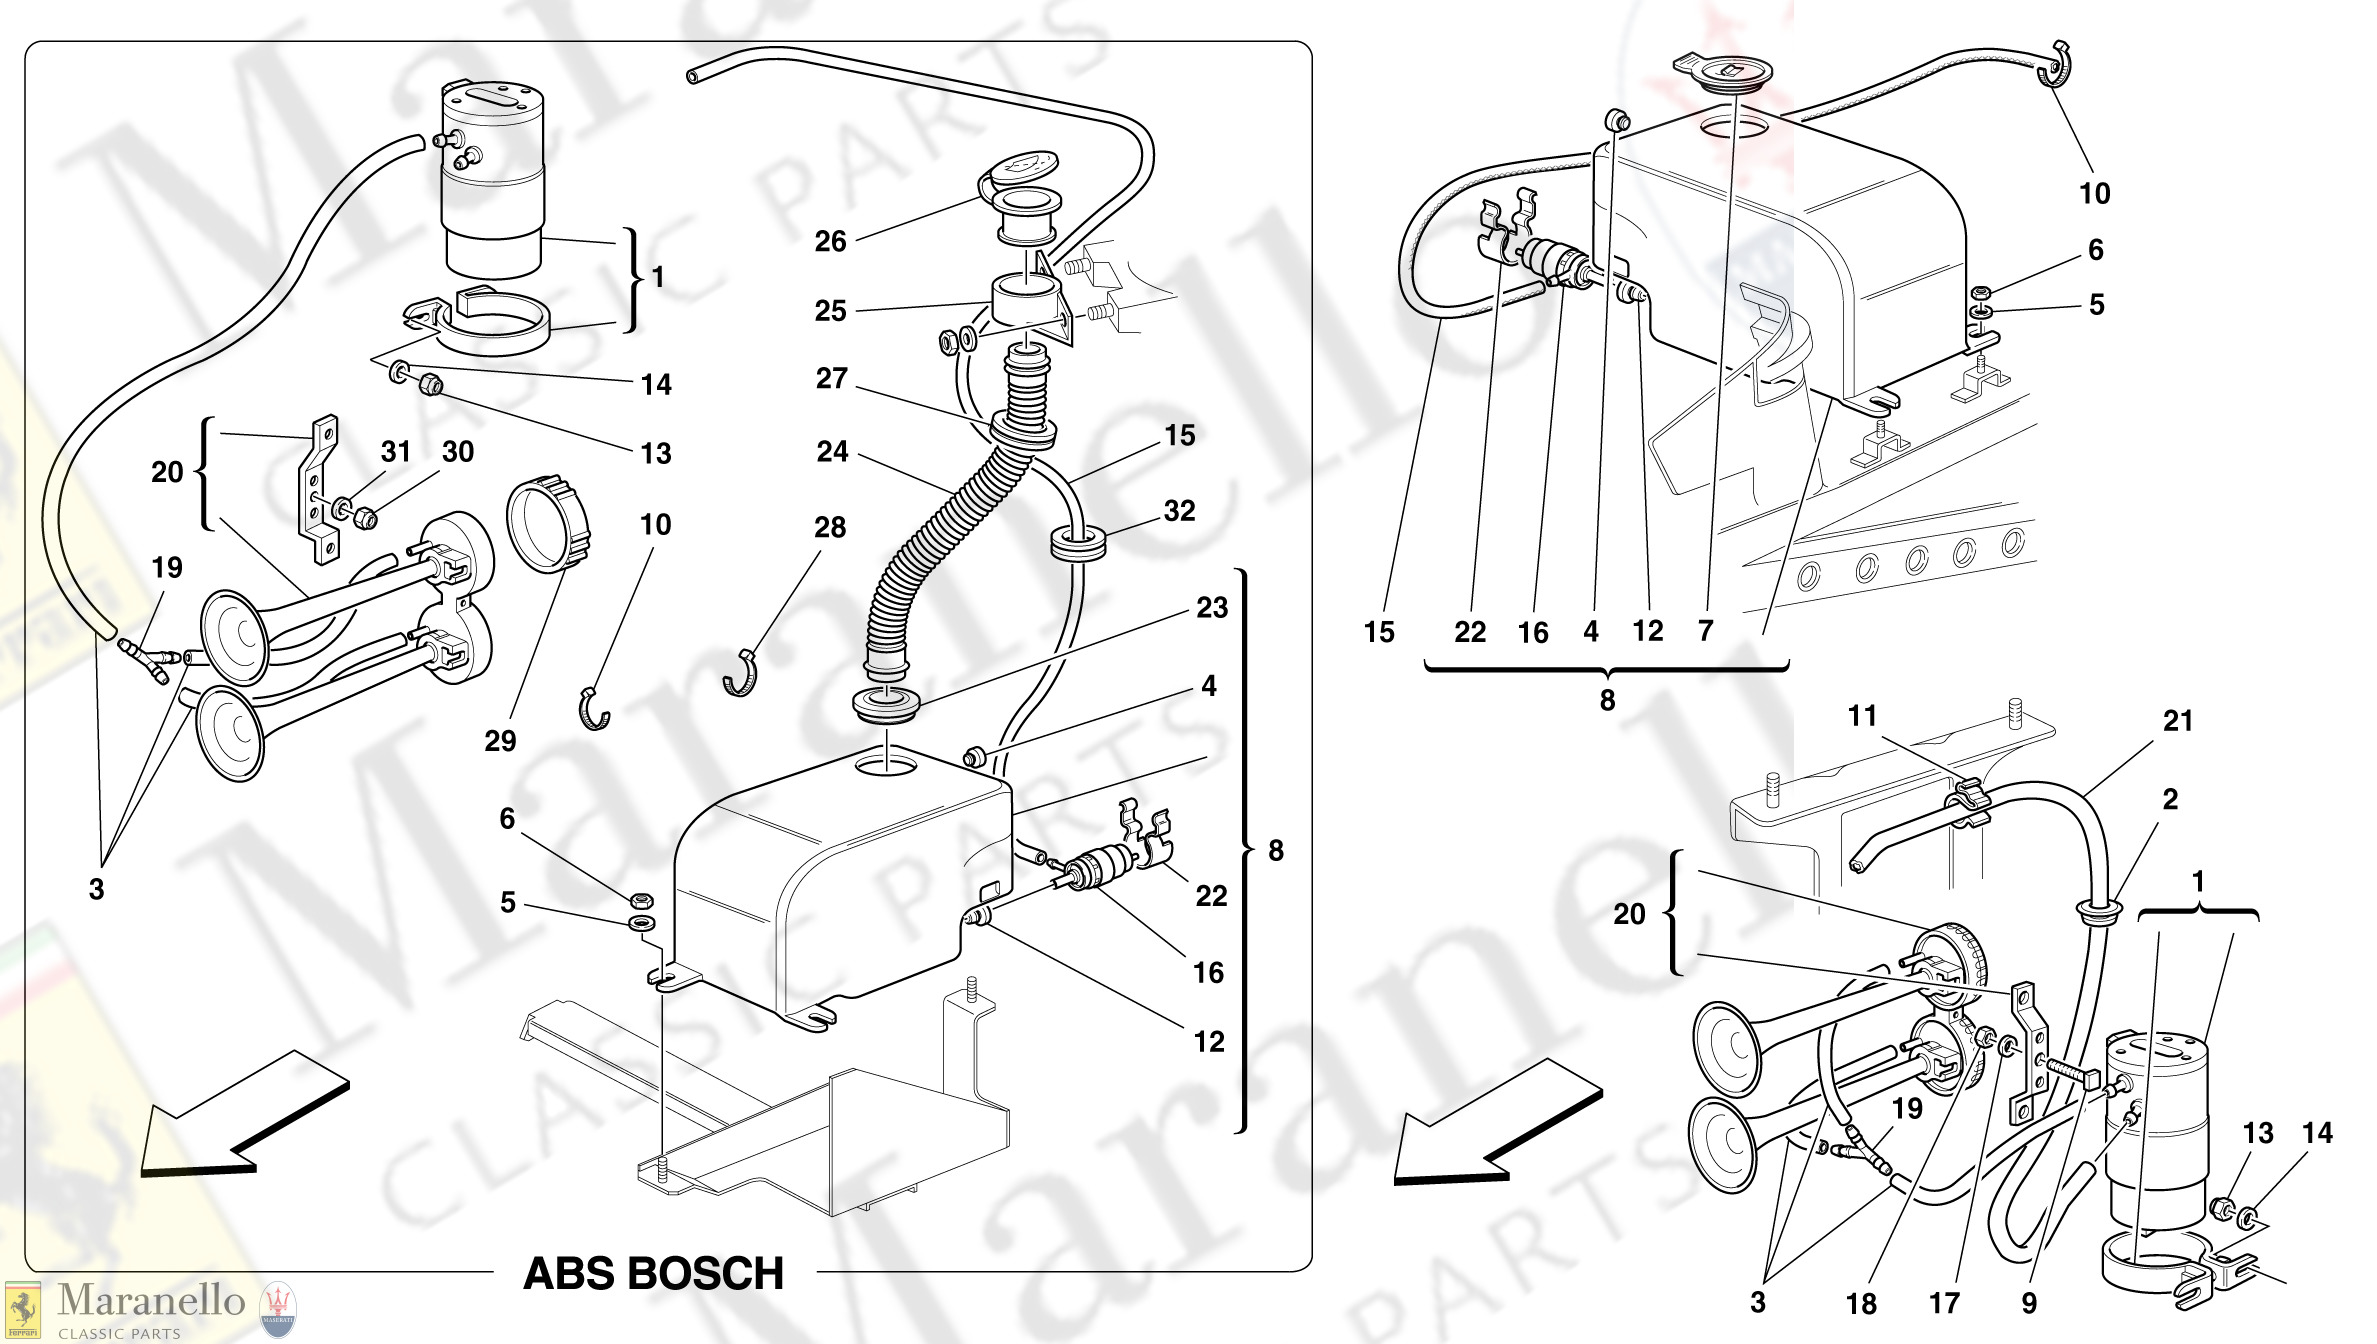 opportunity Deny under 138 - Glass Washer And Horns parts diagram for Ferrari F355 B/GTS/Spider  Mo. 5.2 / ABS Bosch F1 | Maranello Classic Parts